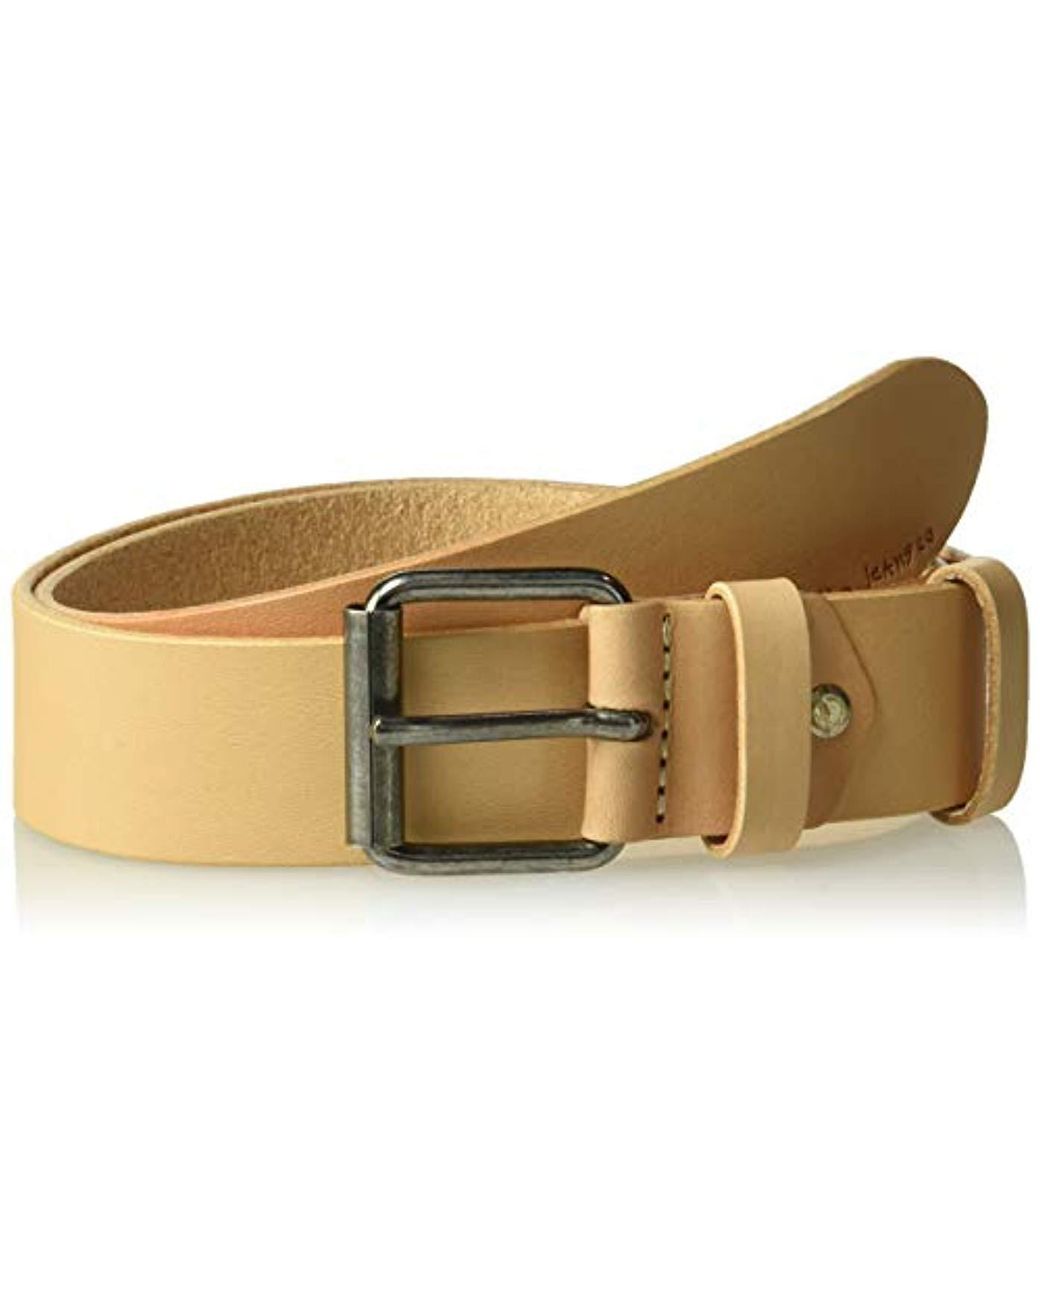 Nudie Jeans Unisex-adult's Pedersson Leather Belt, Natural 75 in ...